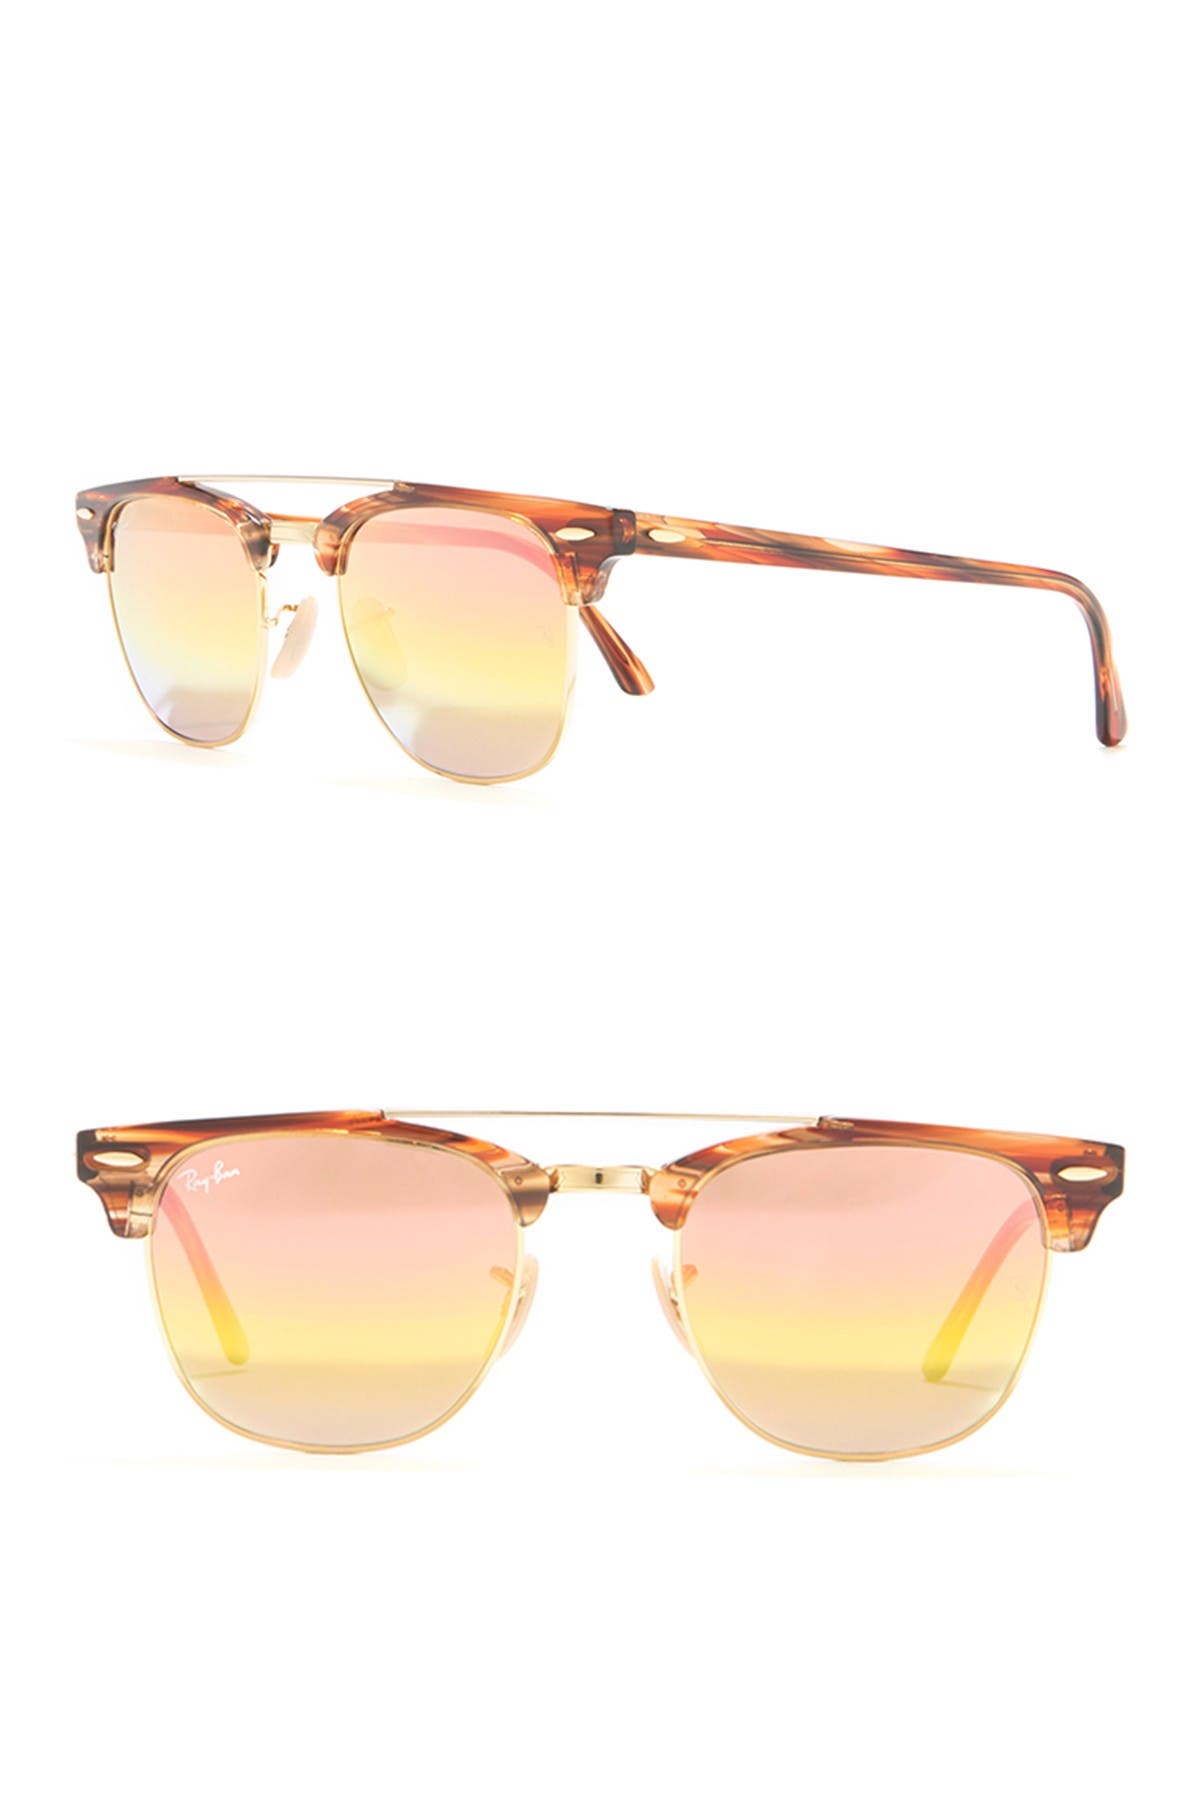 ray ban clubmaster nordstrom